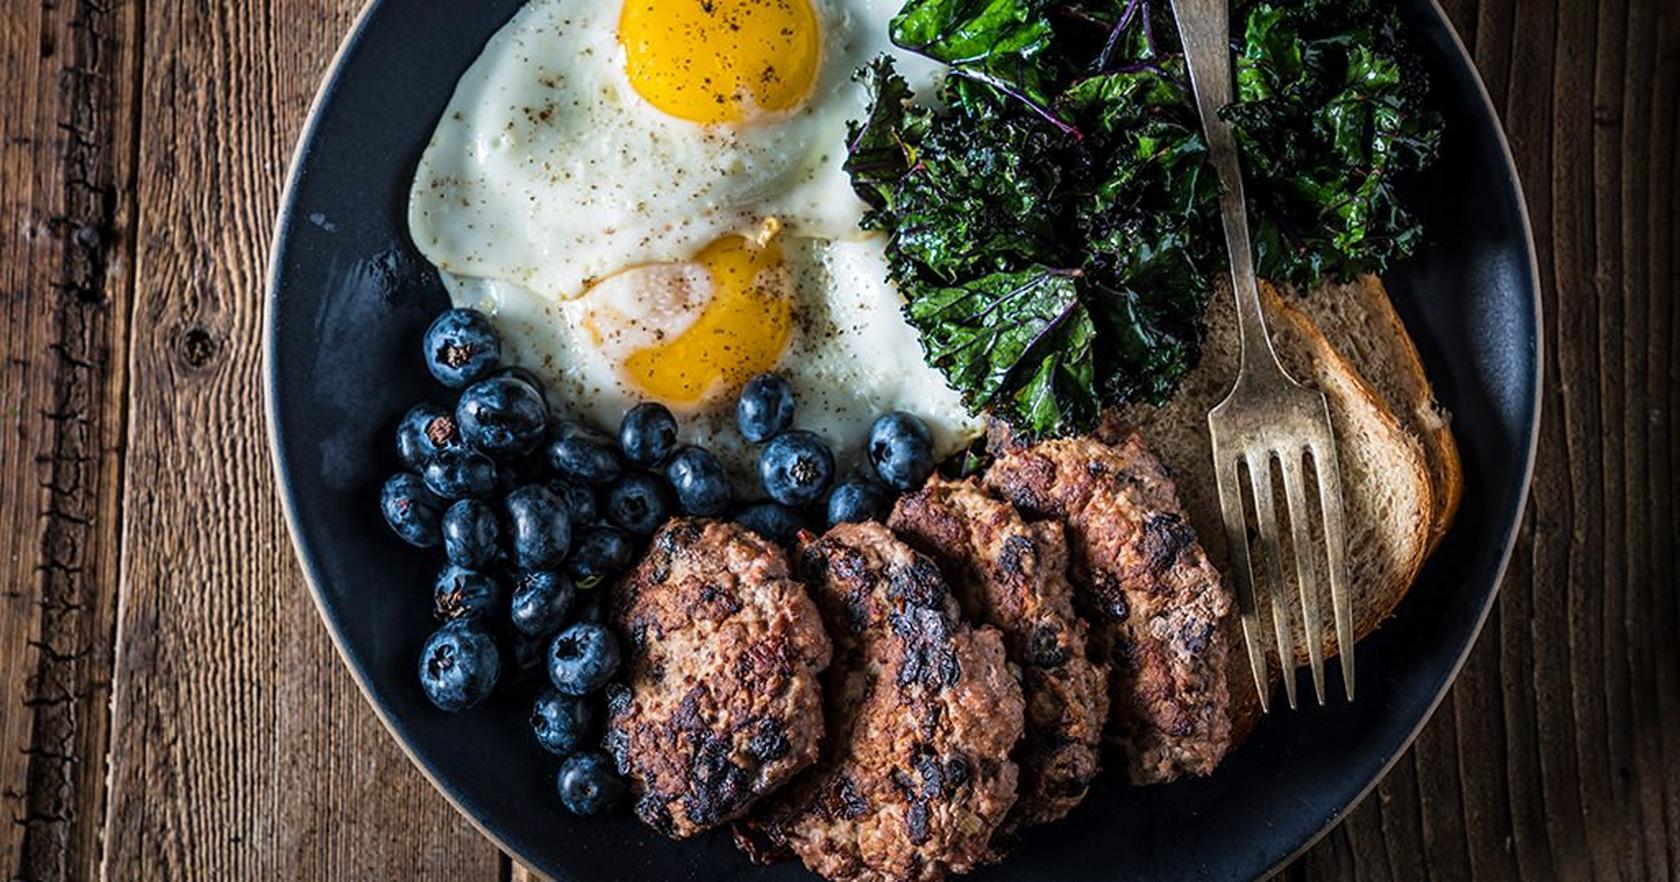 Grilled Blueberry Breakfast Sausage